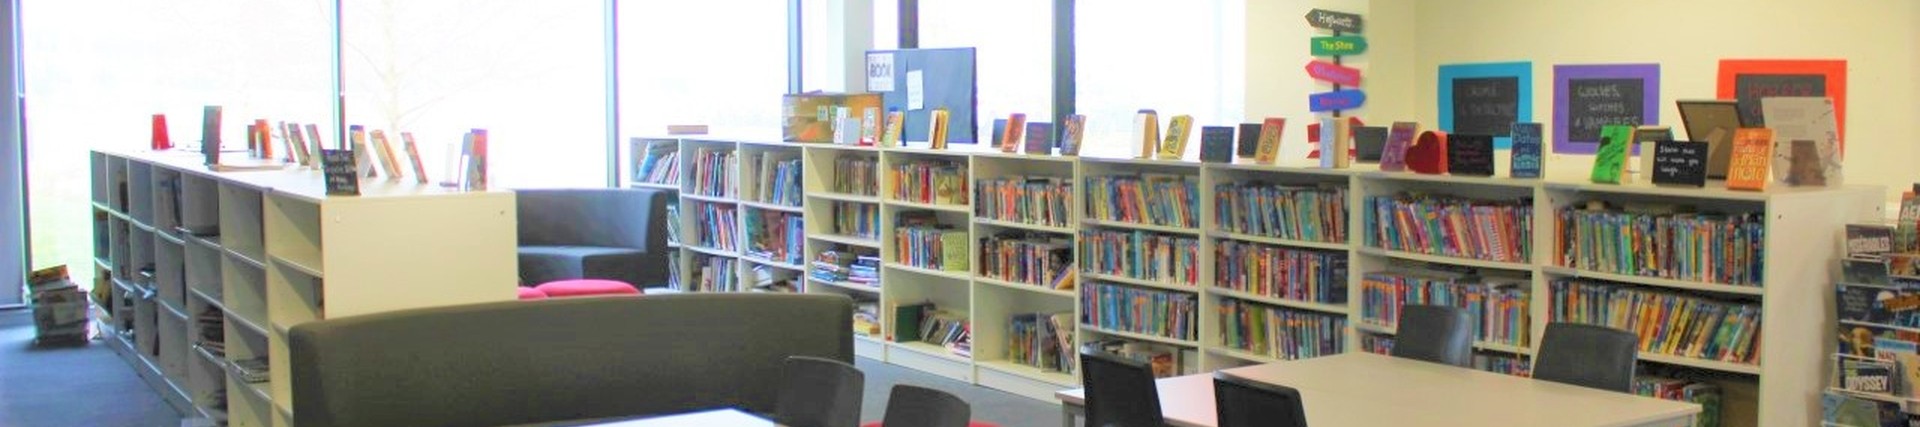 The Victory Academy school library with desks and book shelves 